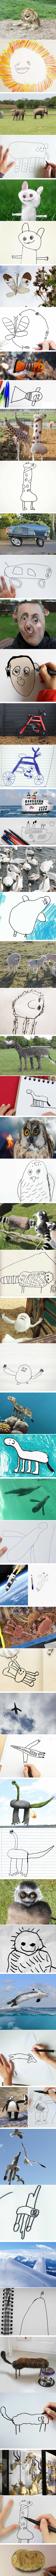 Dad Turns His 6-Year-Old Son’s Drawings Into Reality And The Results Are Both Creepy And Hilarious (By Dom)